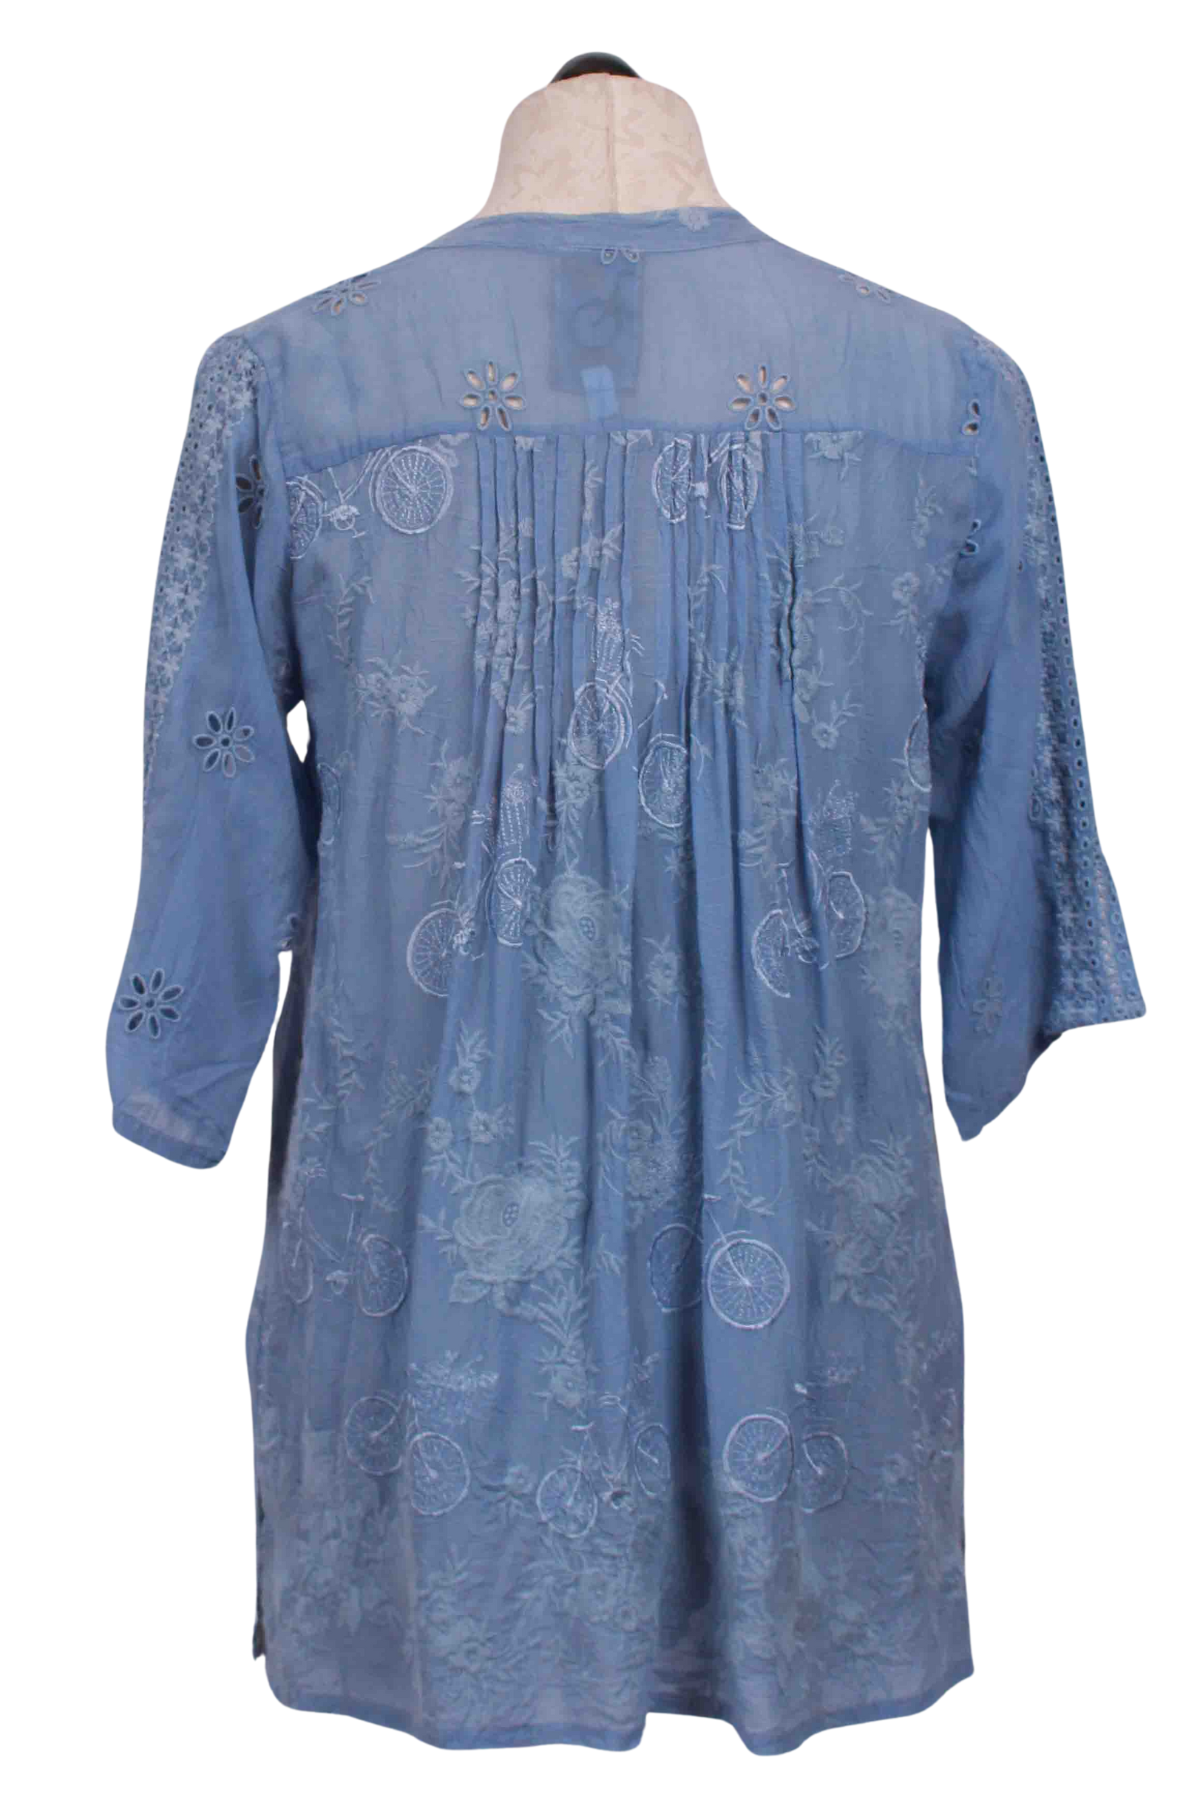 Back view of Blissful Blue Tili Ryder Tunic by Johnny Was